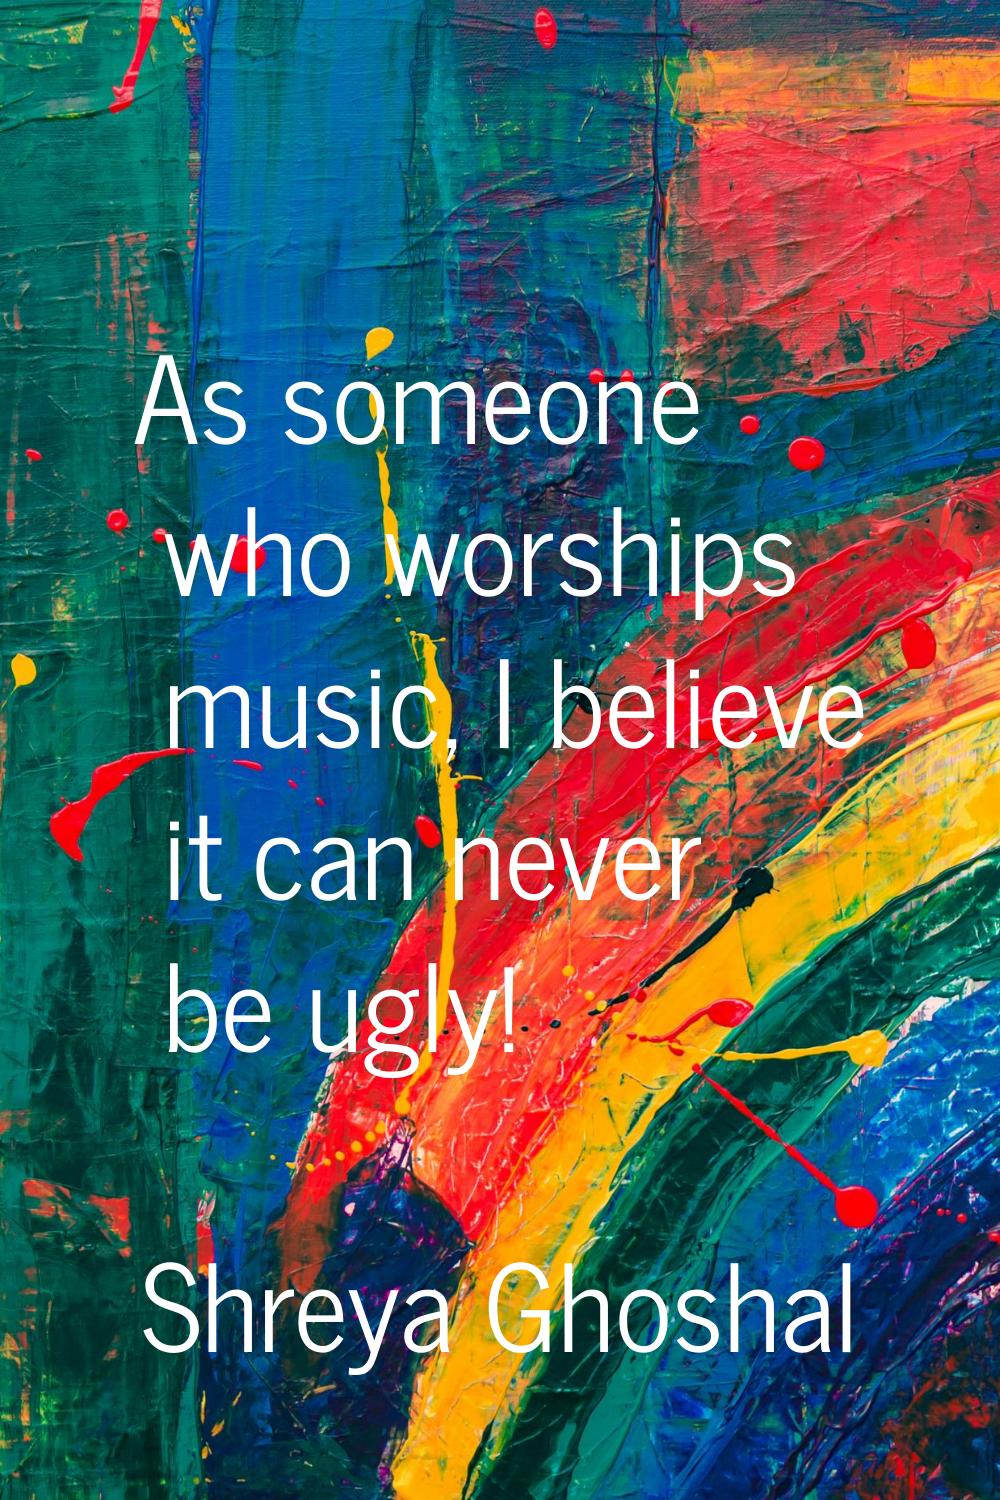 As someone who worships music, I believe it can never be ugly!